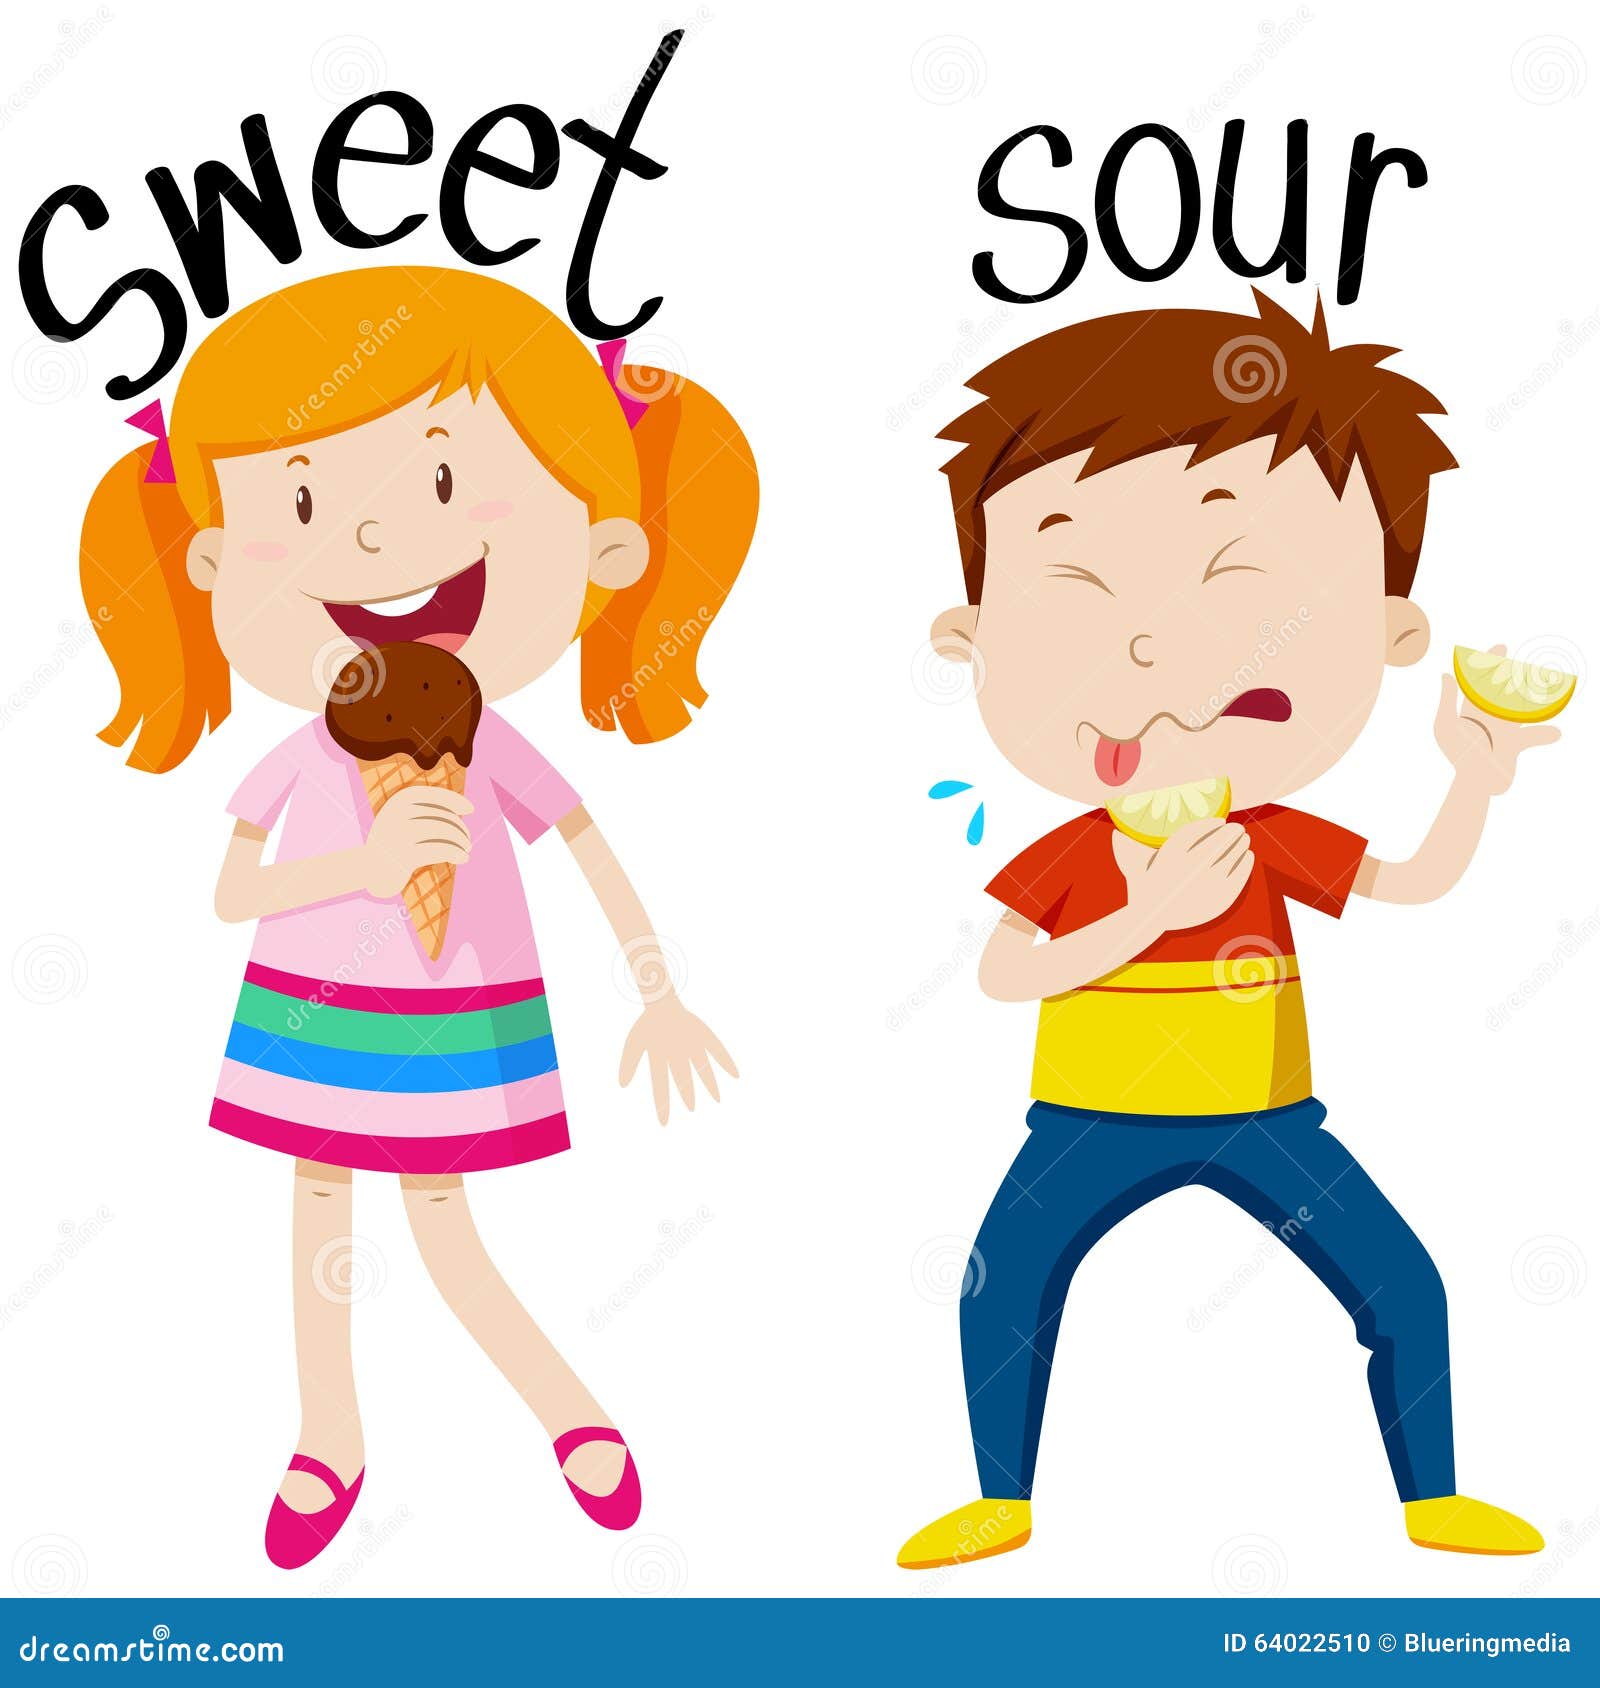 Opposite Adjectives With Sweet And Sour Stock Vector - Image: 64022510